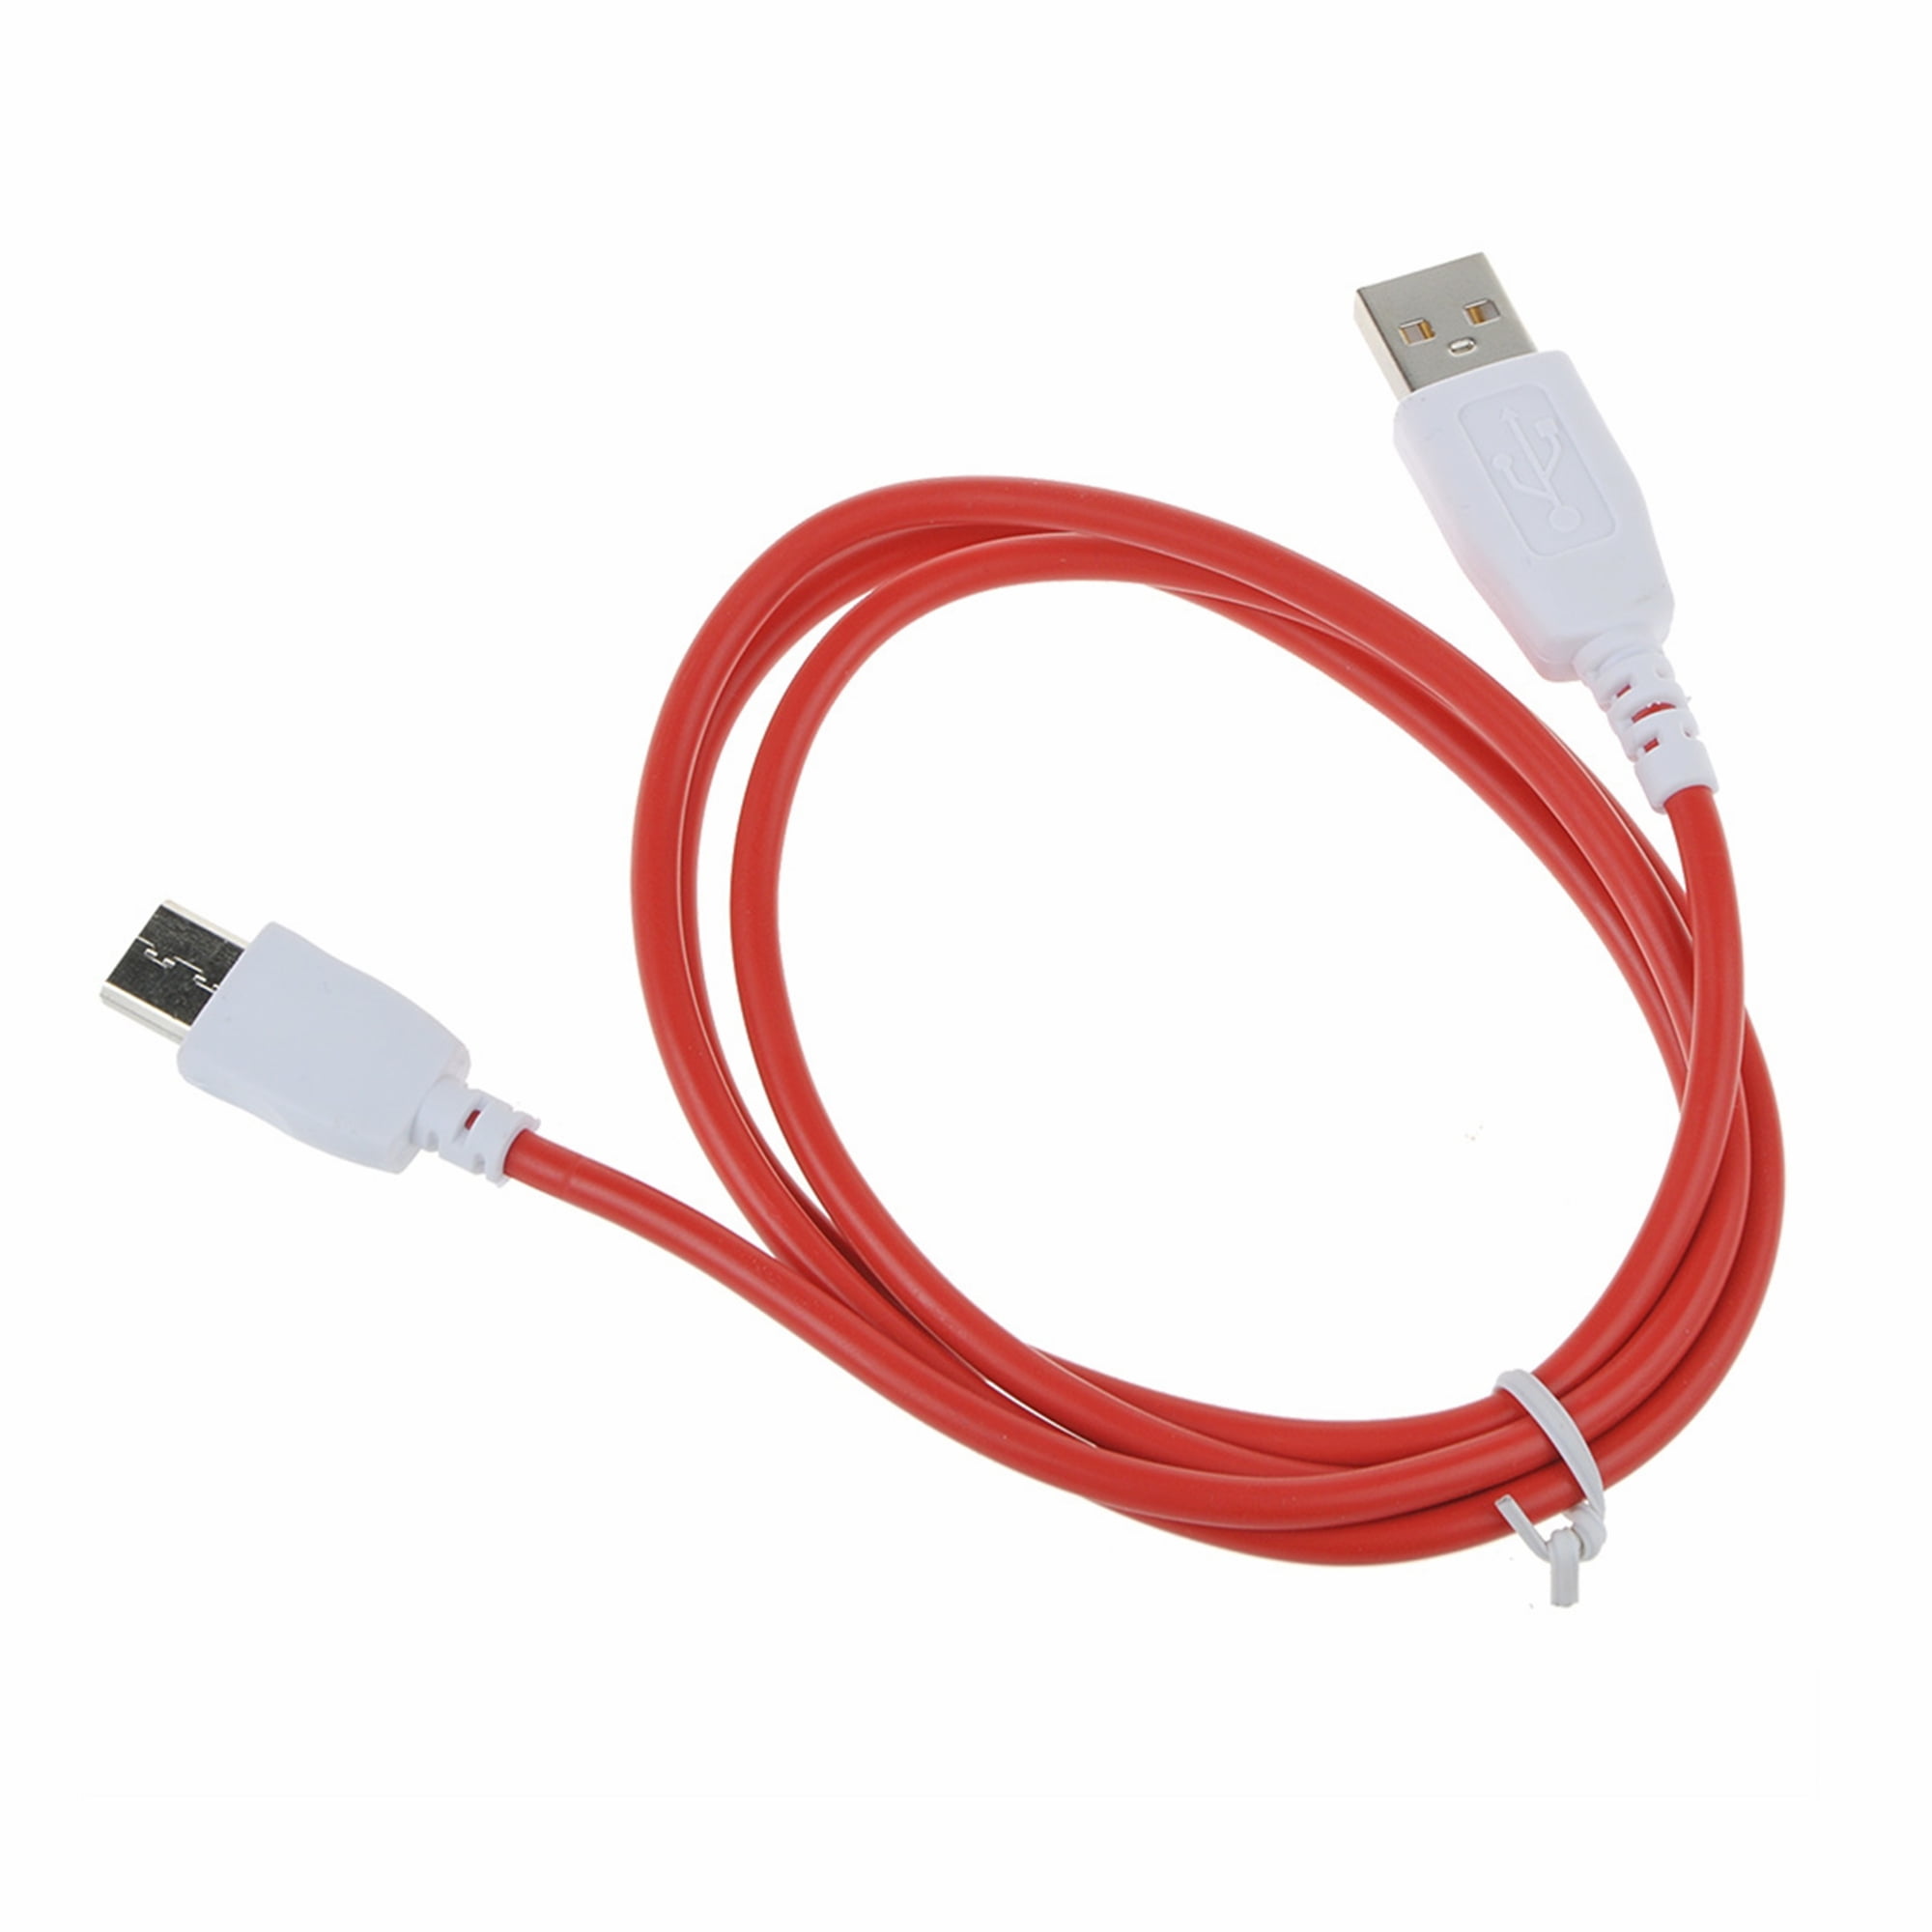 USB DC Charging Charger Cable Cord For Lenovo IdeaTab S2109 A-F 22911EU Tablet 